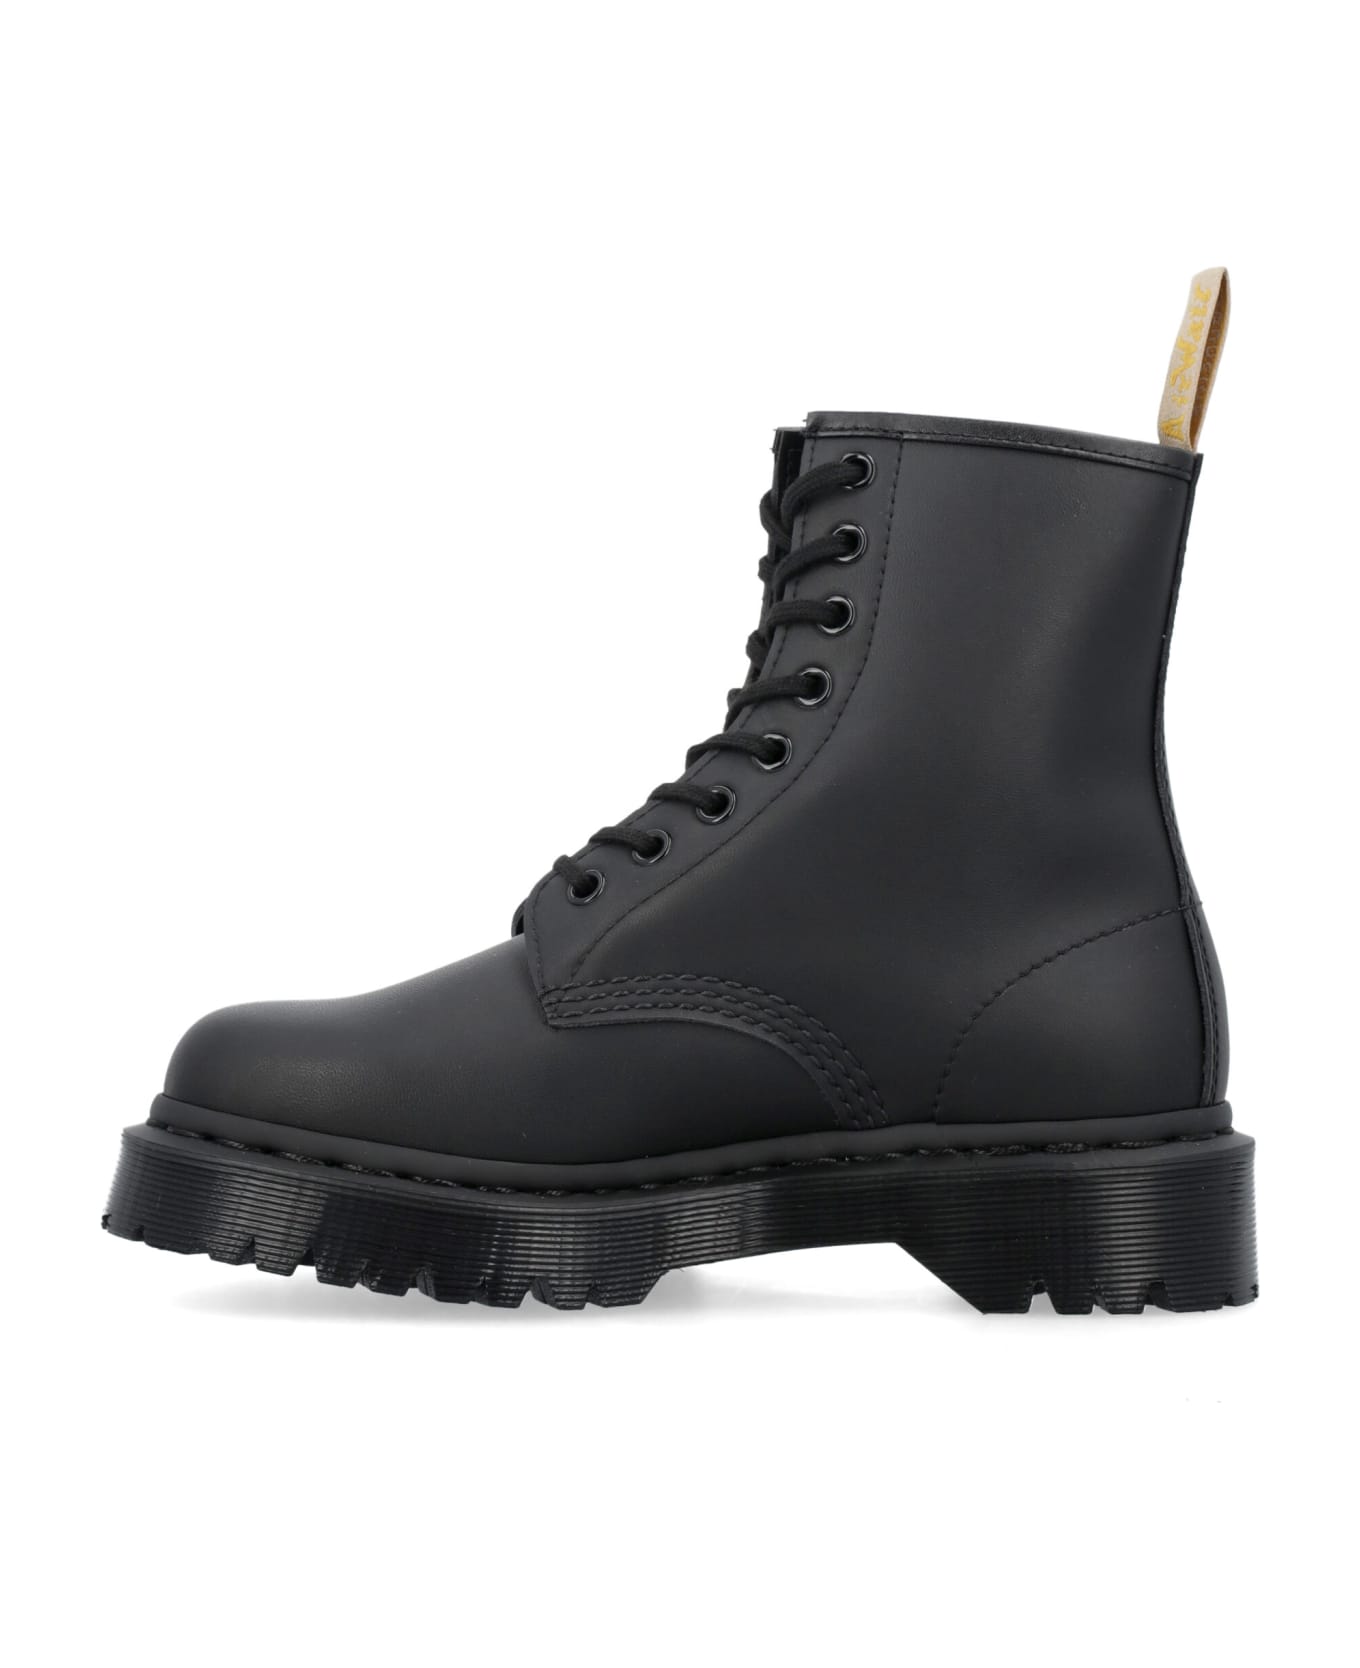 Dr. Martens 1460 Mono Combat Boots In Black Leather - BLACK